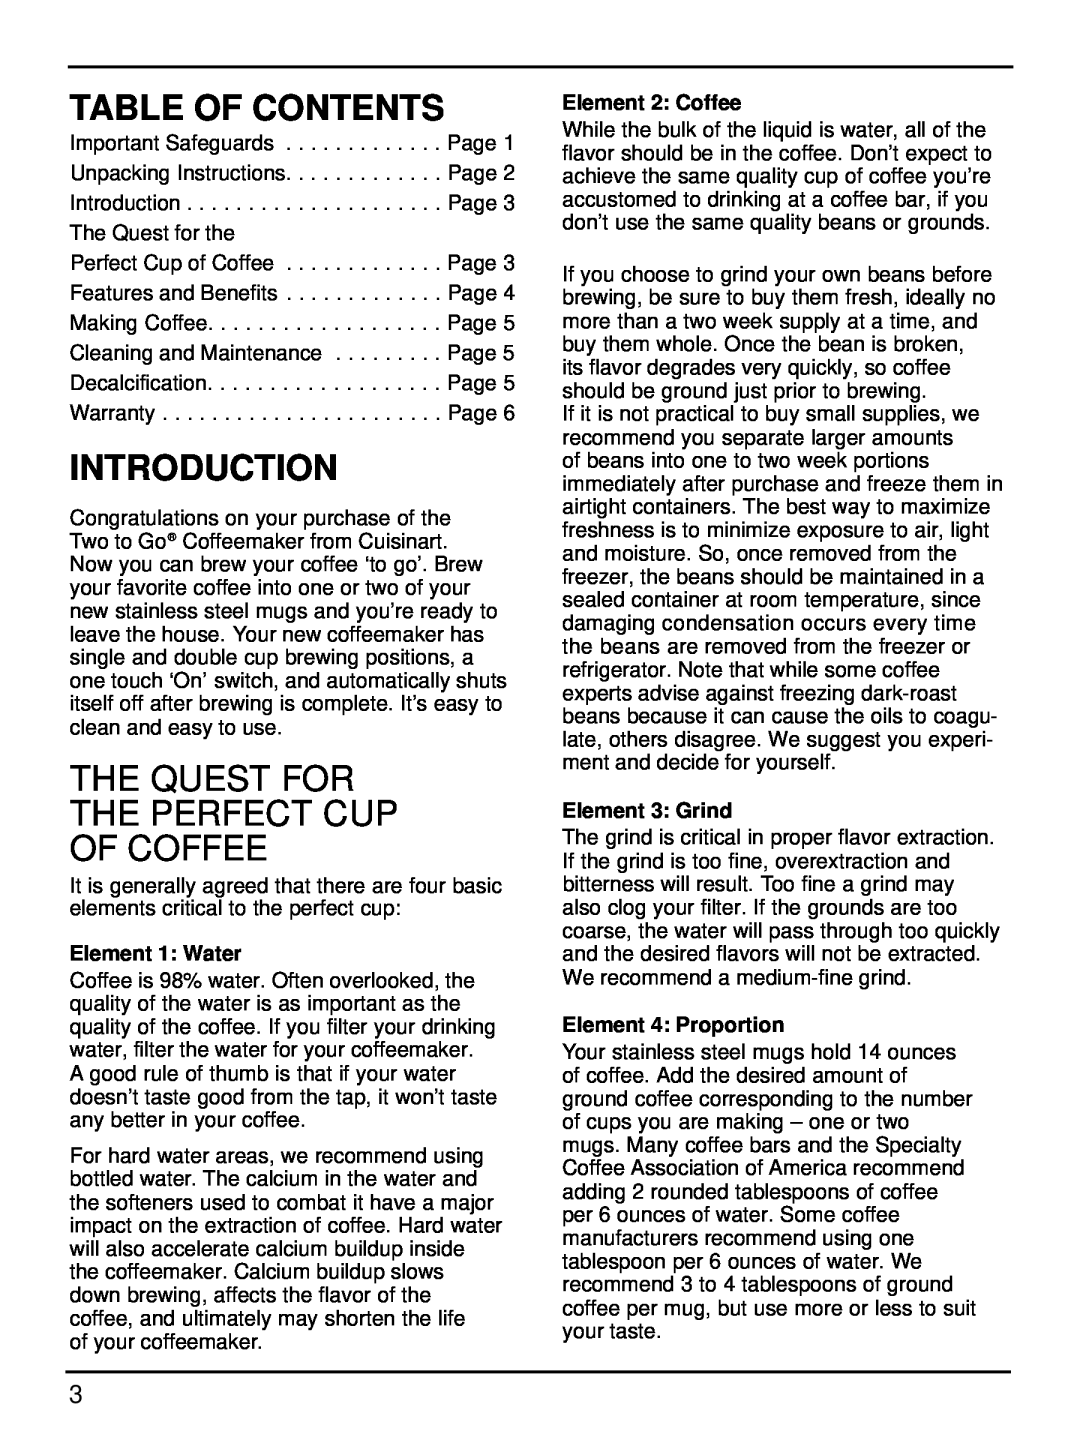 Cuisinart TTG-500 manual Table Of Contents, Introduction, The Quest For The Perfect Cup Of Coffee, Element 1 Water 